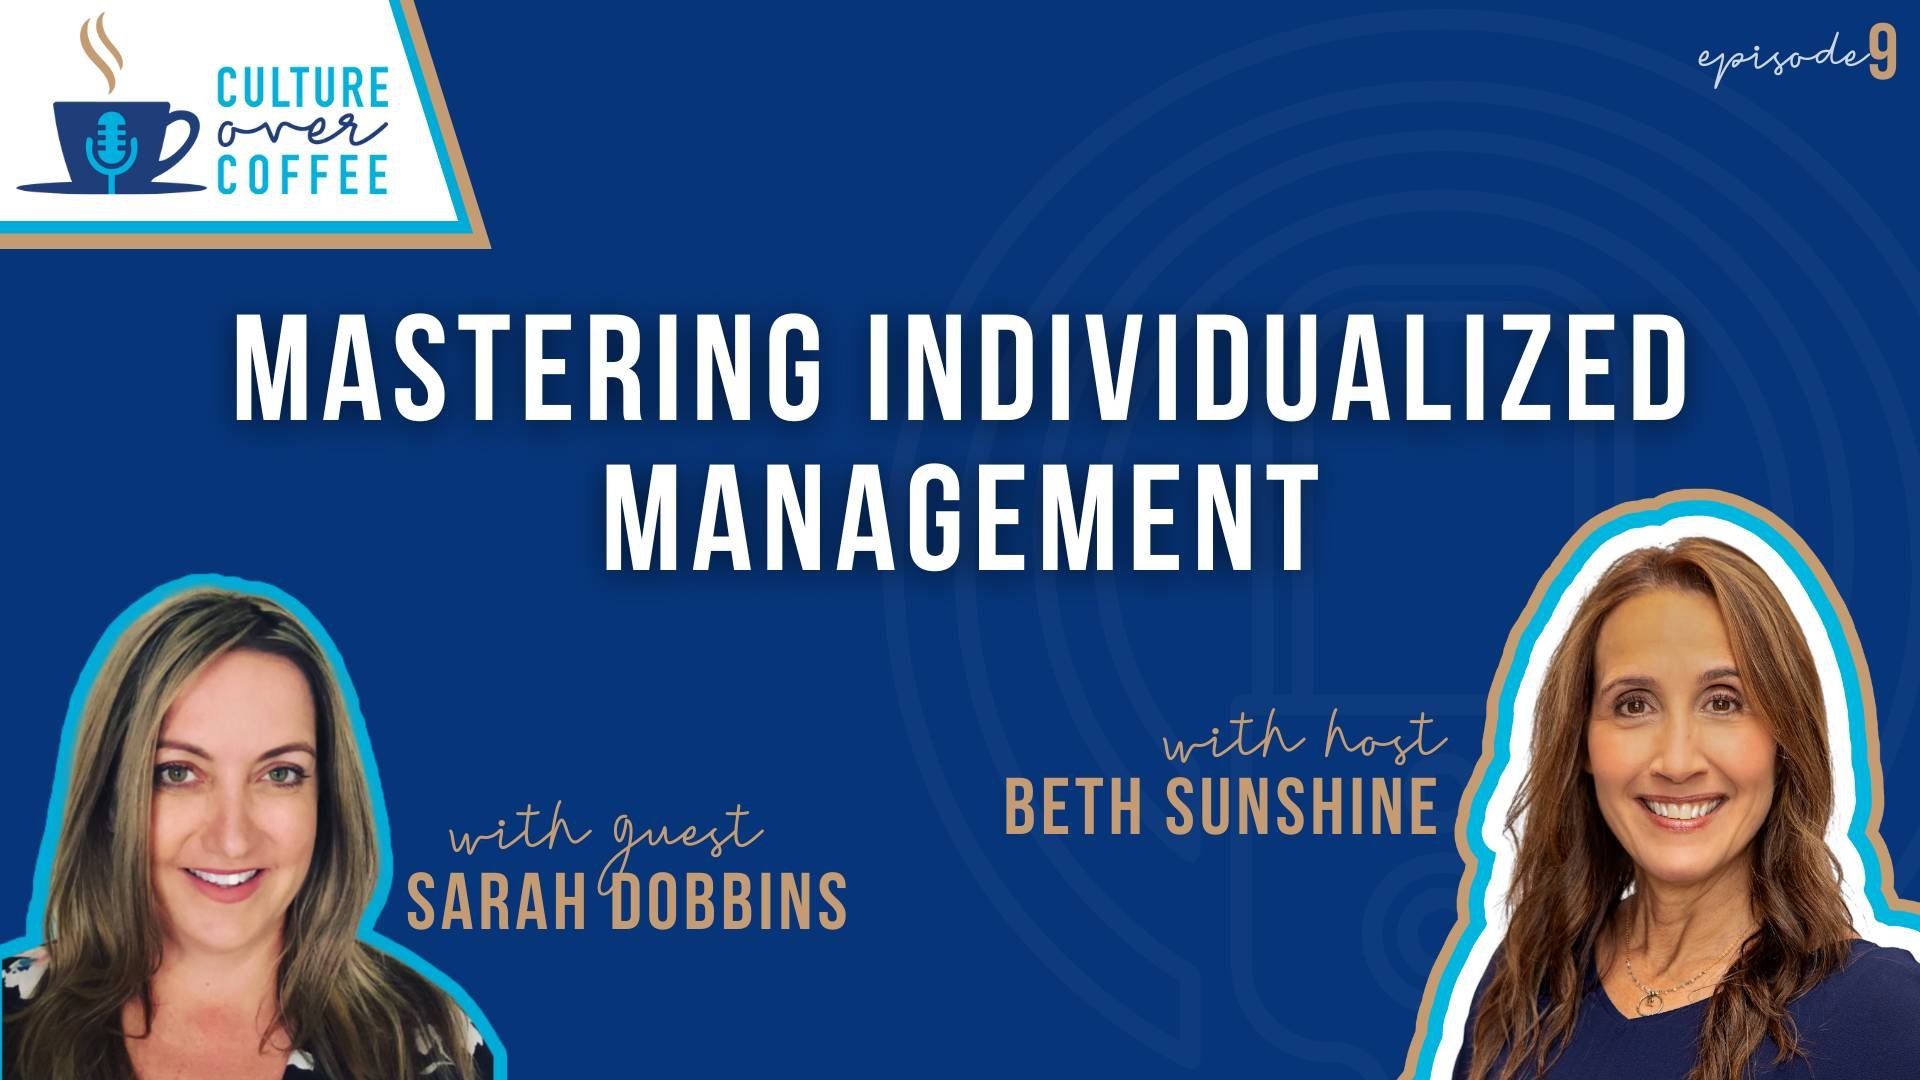 Culture Over Coffee - Ep 9 - Mastering Individualized Management with Sarah Dobbins